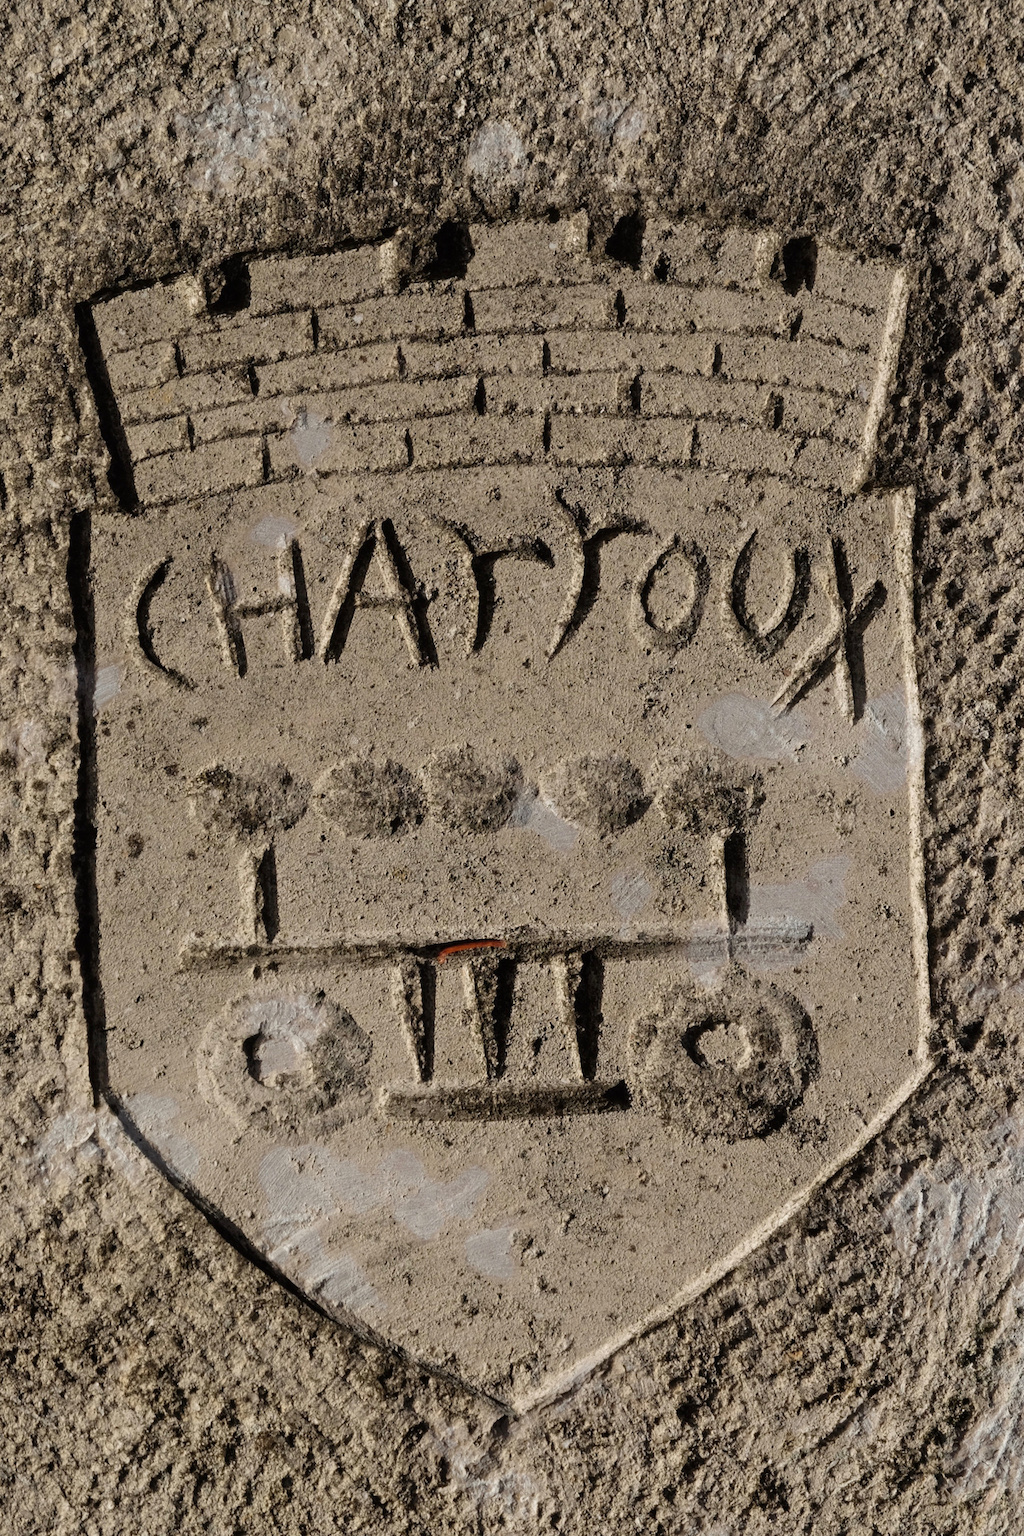 Charroux shield carved in stone